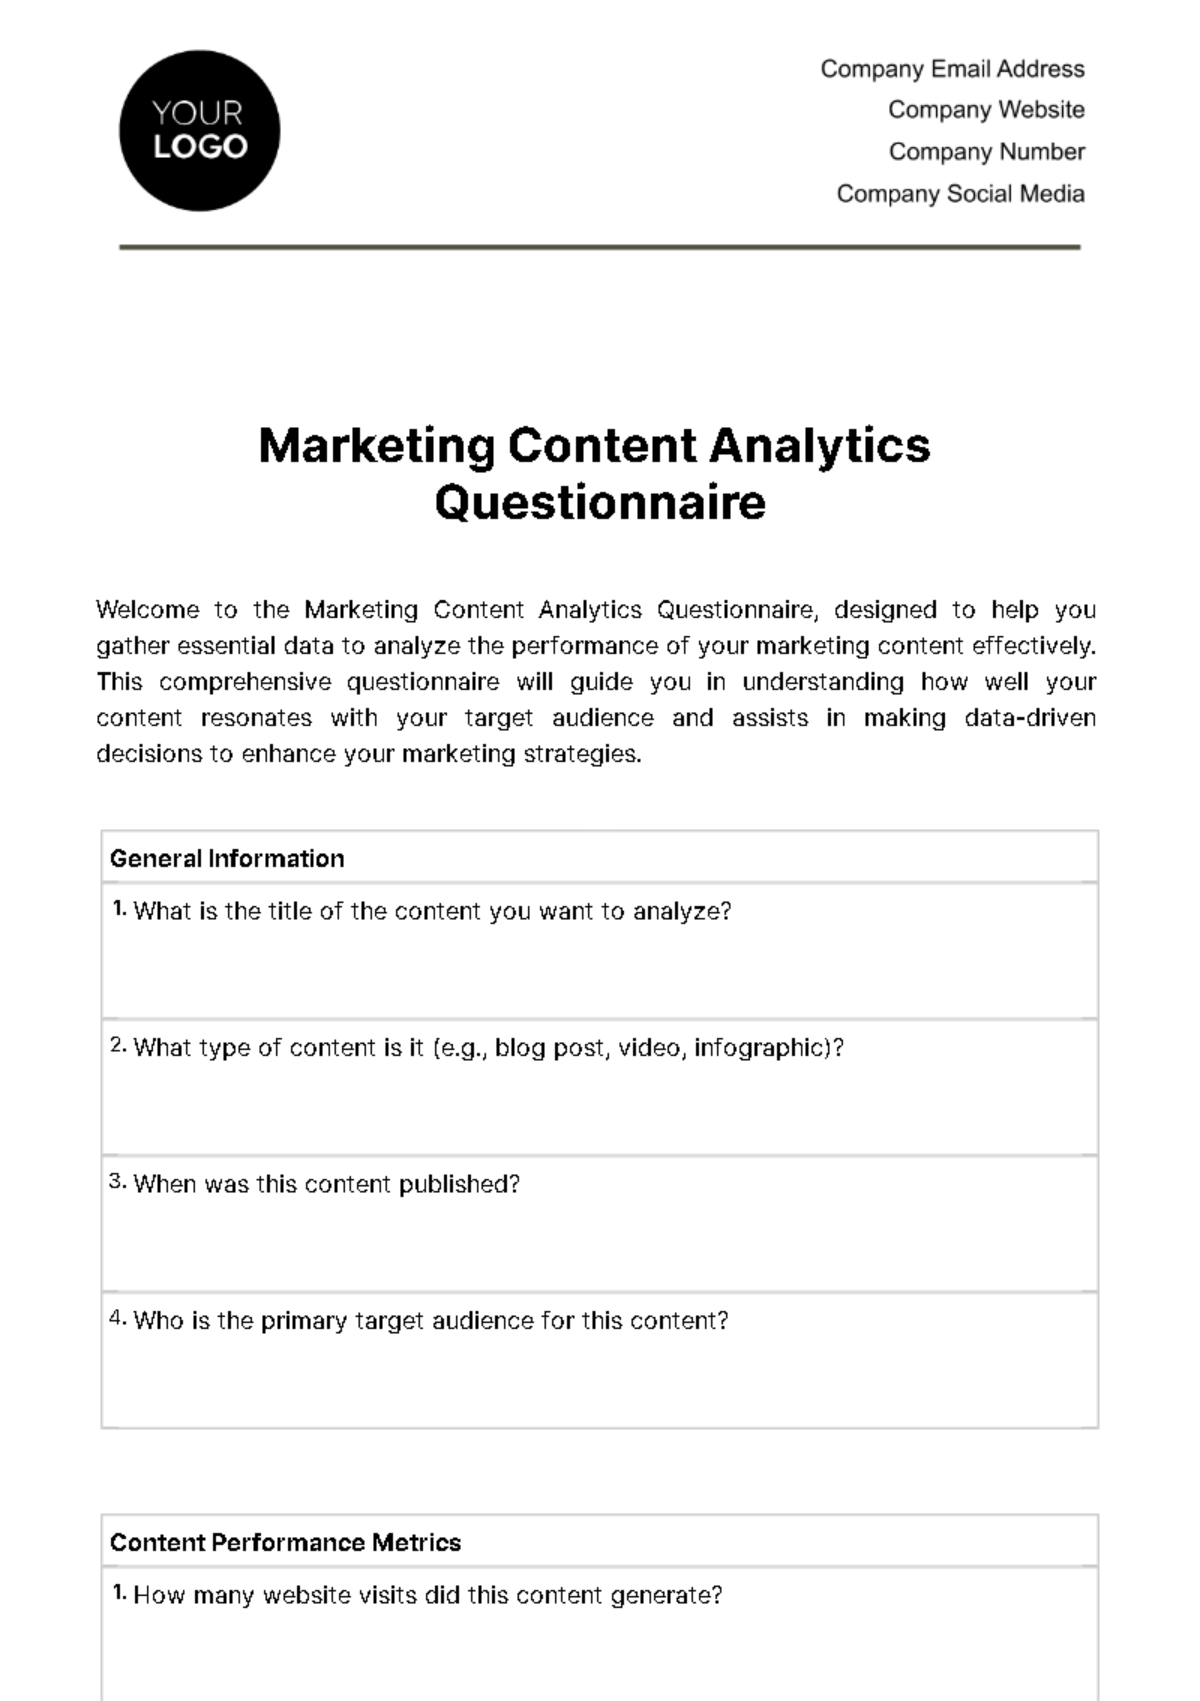 Marketing Content Analytics Questionnaire Template